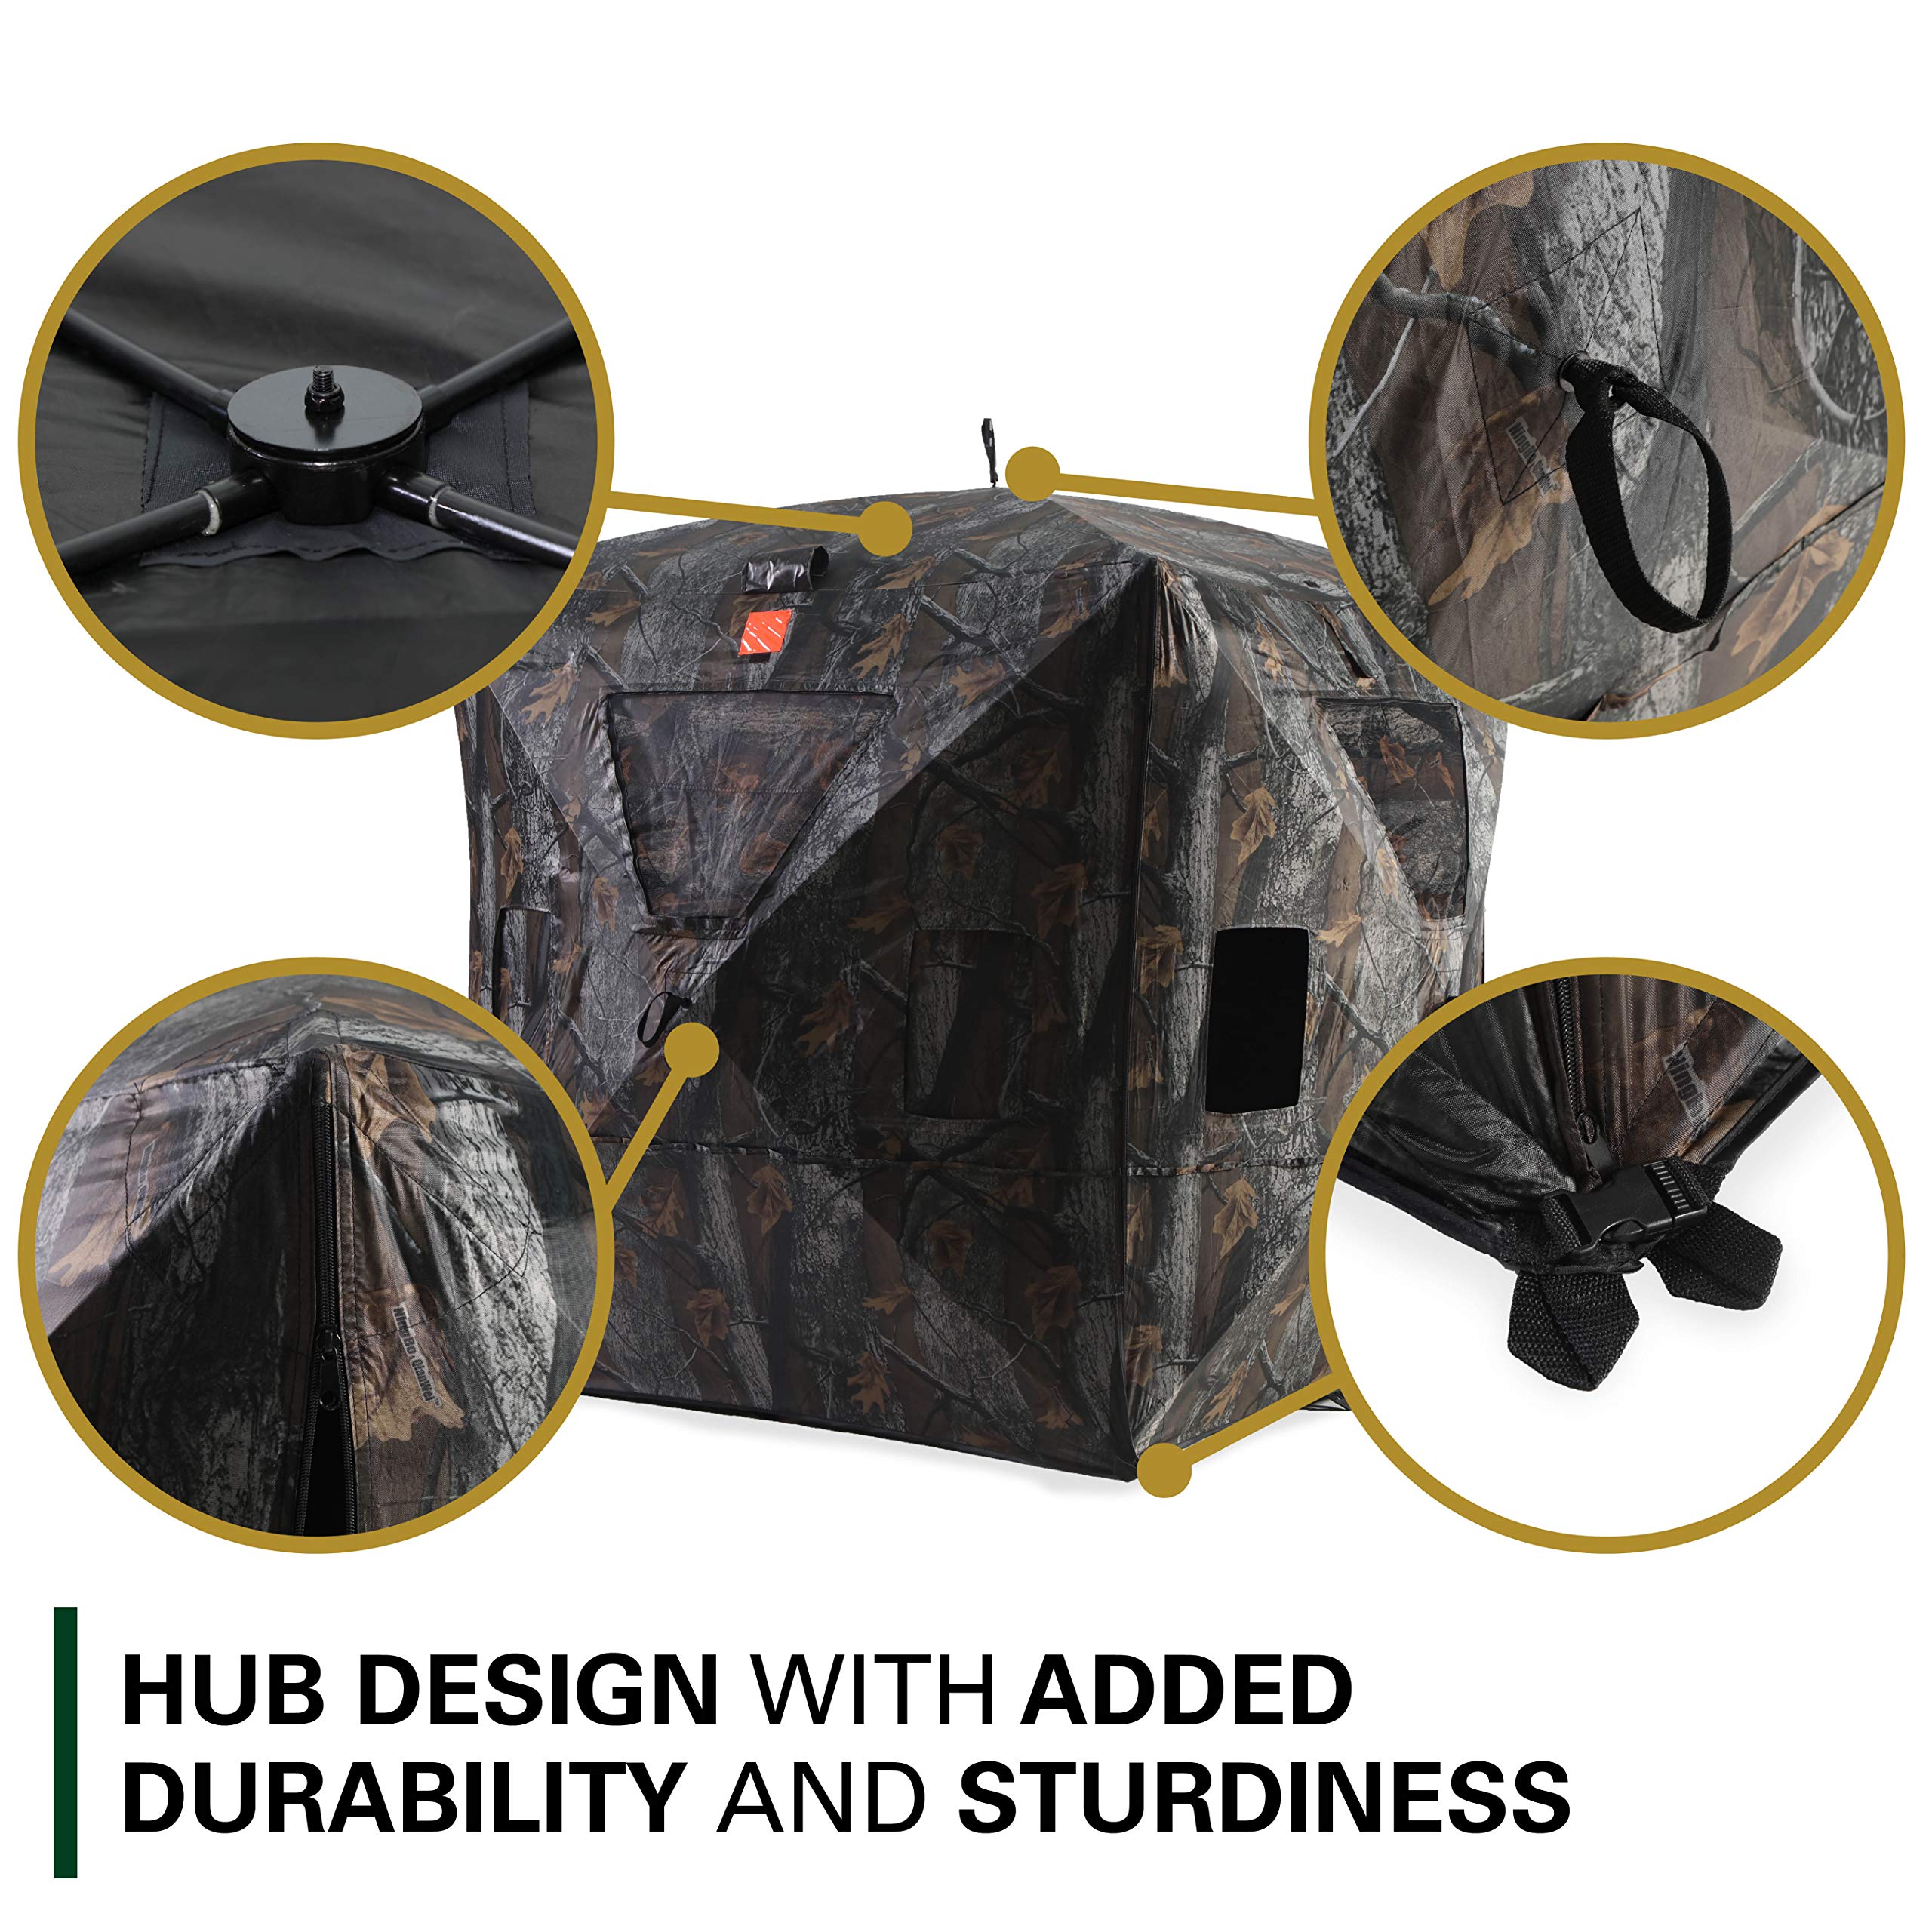 Black Hoof Outdoors Deluxe Hunting Blind, Ground Blind for Deer & Turkey, Pop Up Hub Design Tent with Stakes for 2-3 Person, Camouflage Screen and Adjustable Windows for Gun, Bow, & Photography